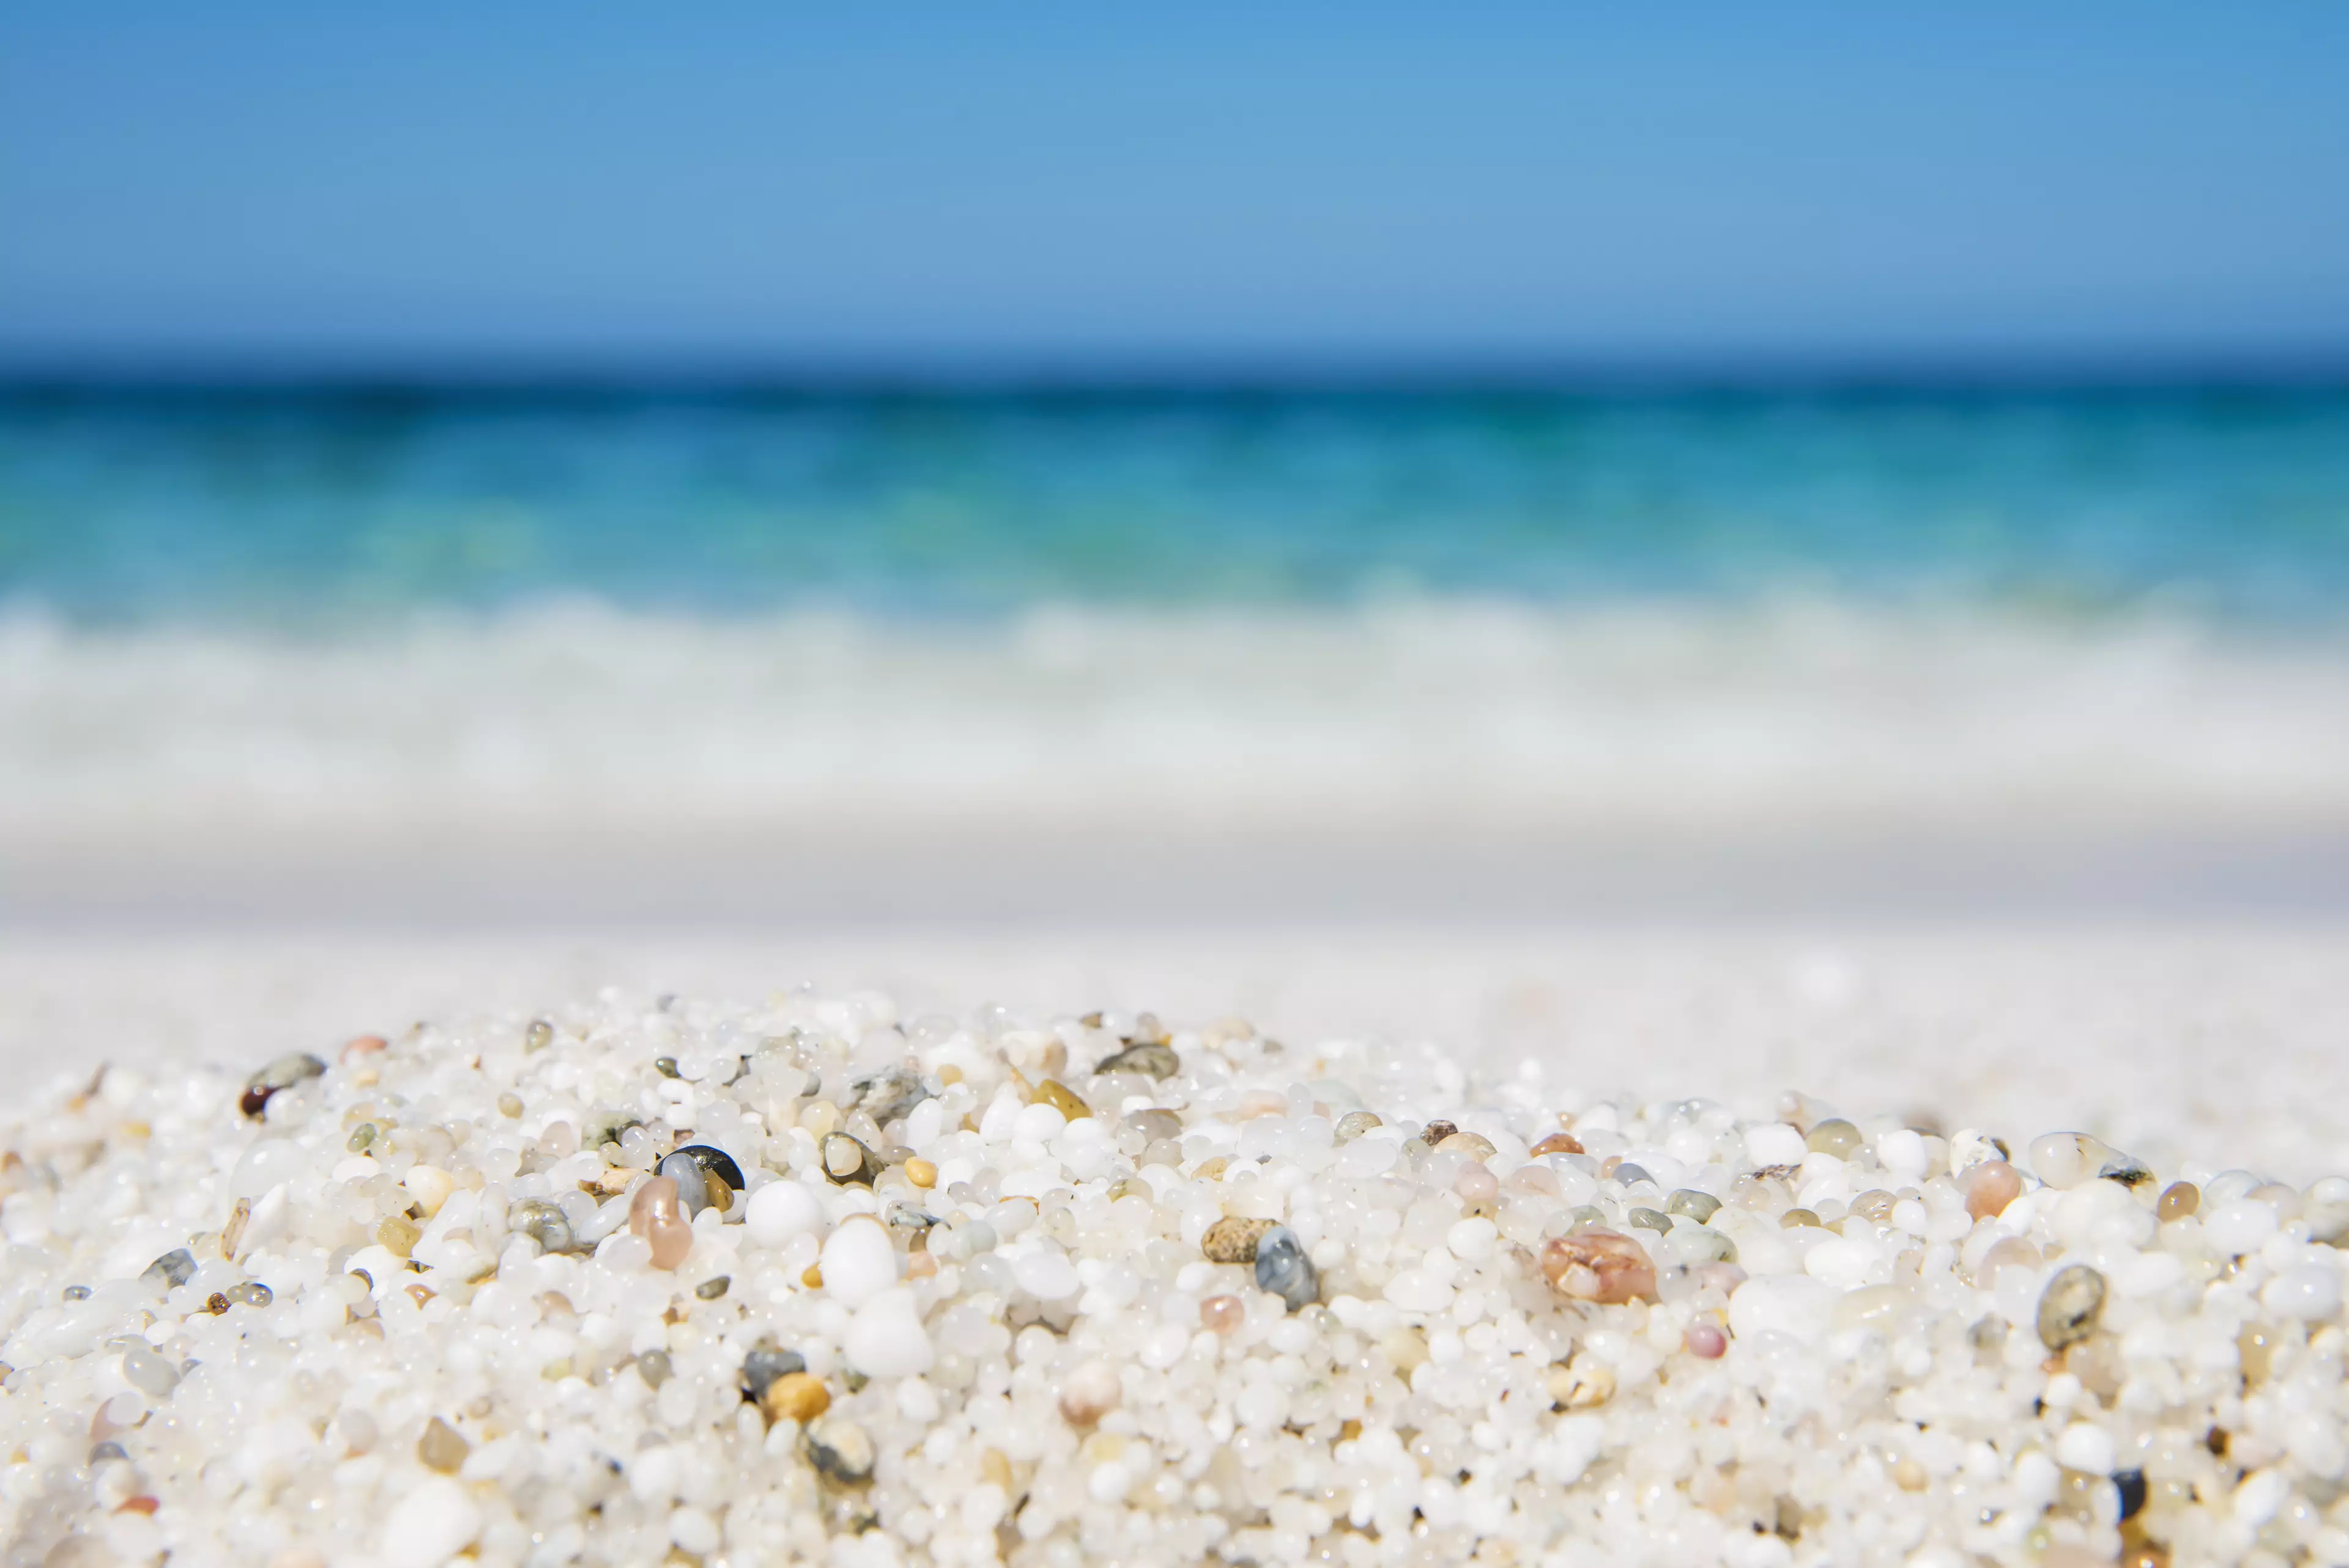 A French tourist was fined for trying to take sand from a Sardinian beach.